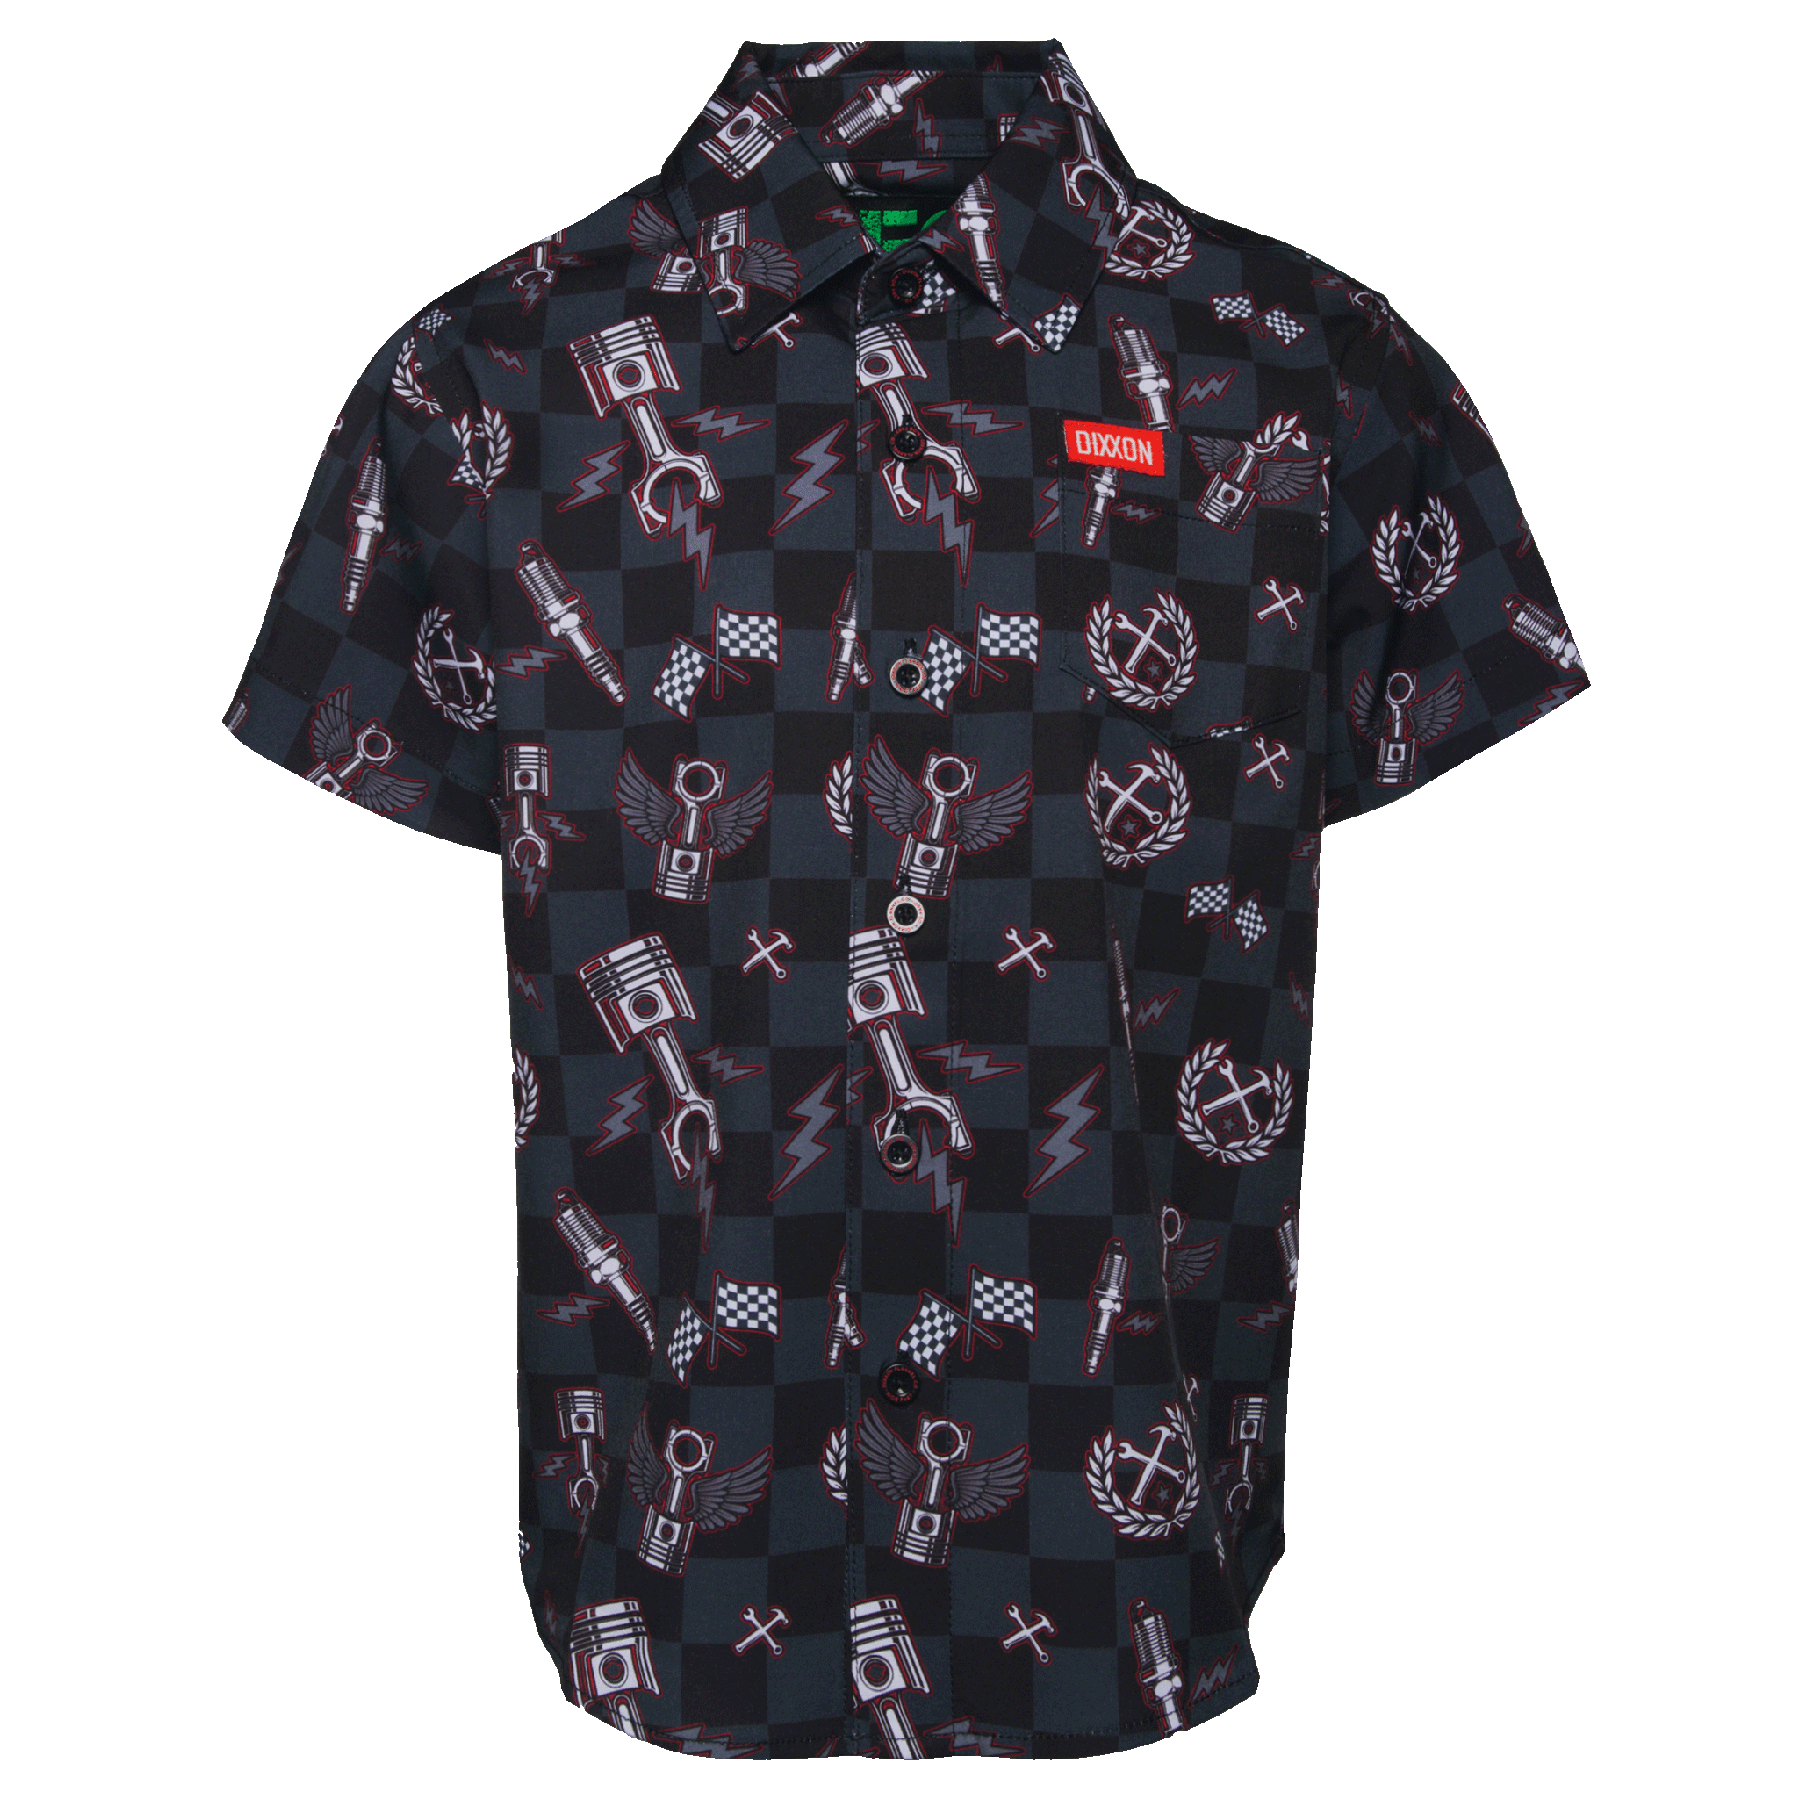 Youth Ride Fast Short Sleeve - Dixxon Flannel Co.